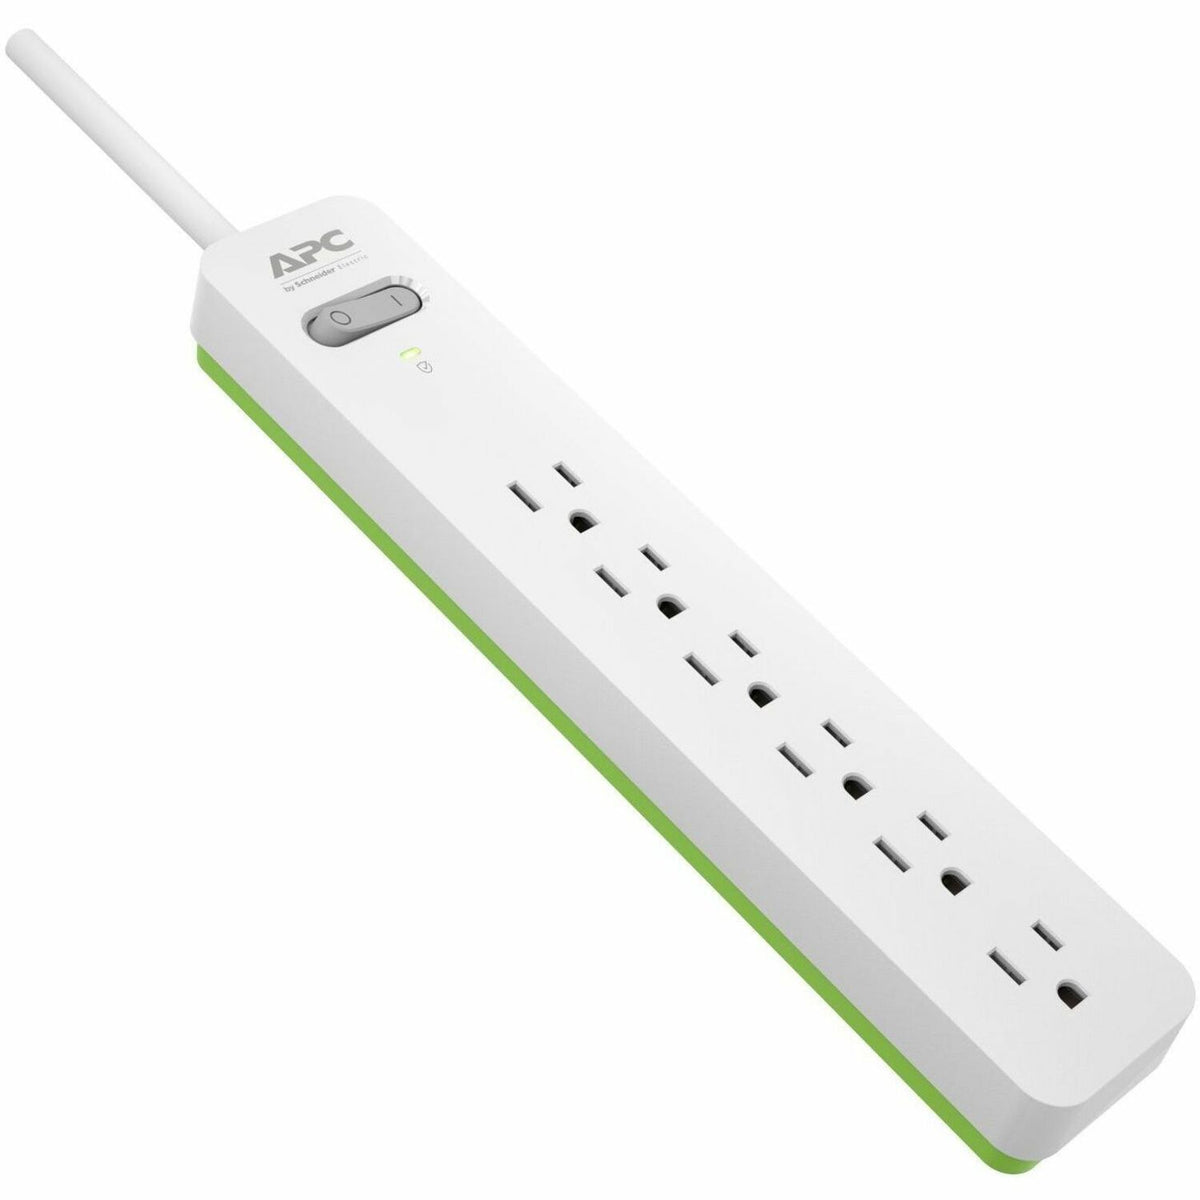 APC by Schneider Electric Essential SurgeArrest PE66W, 6 Outlets, 6 Foot Cord, 120V, White - PE66W